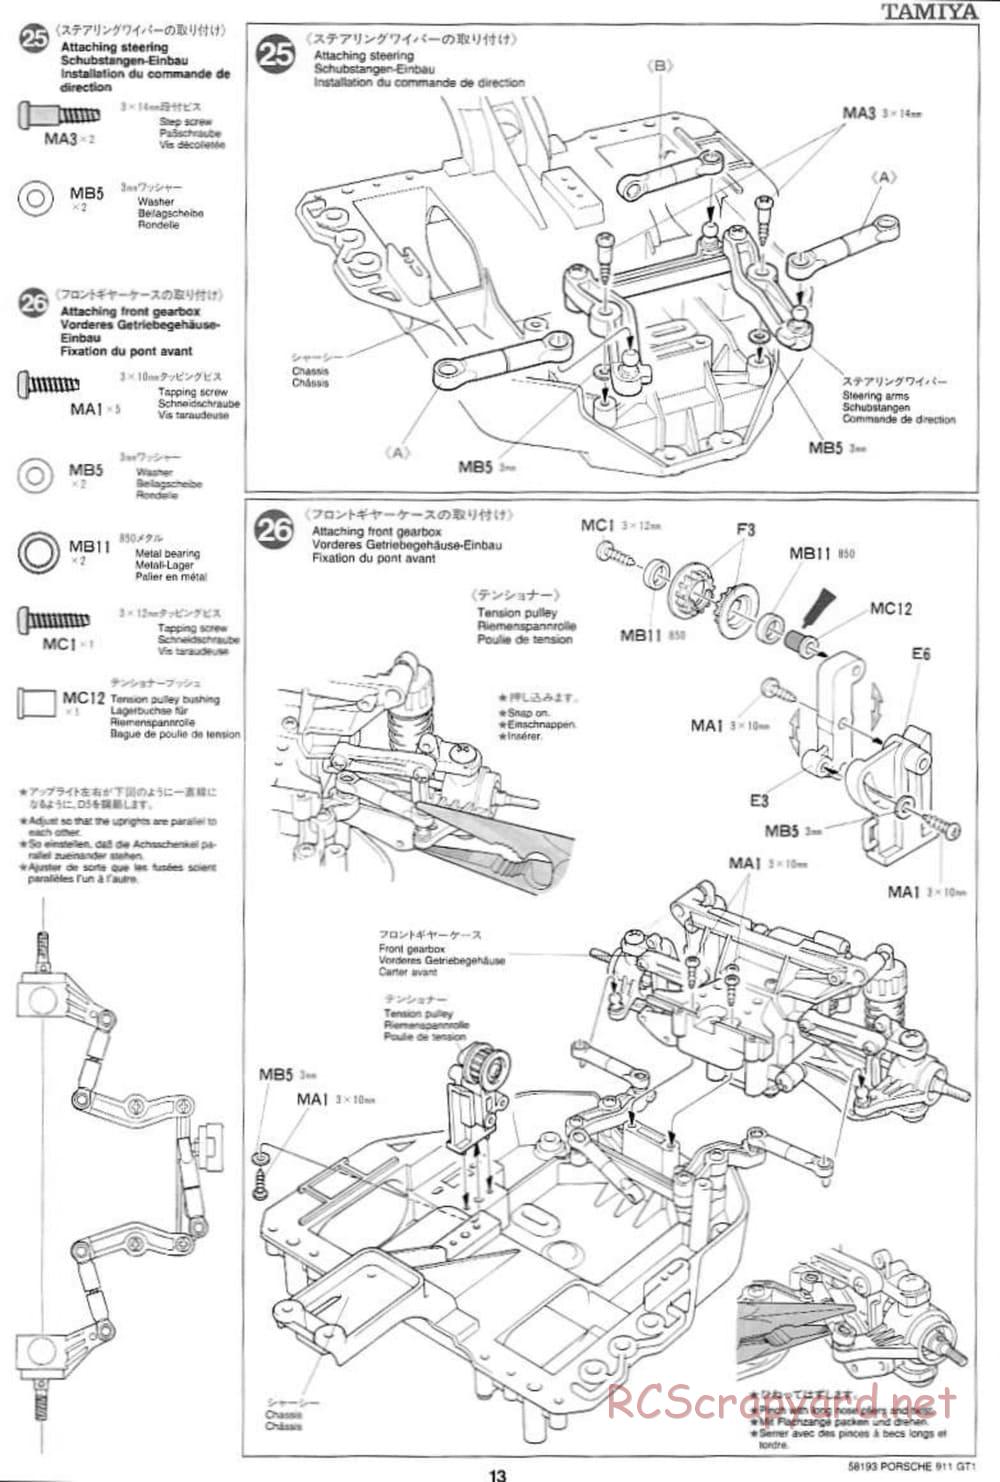 Tamiya - Porsche 911 GT1 - TA-03RS Chassis - Manual - Page 13